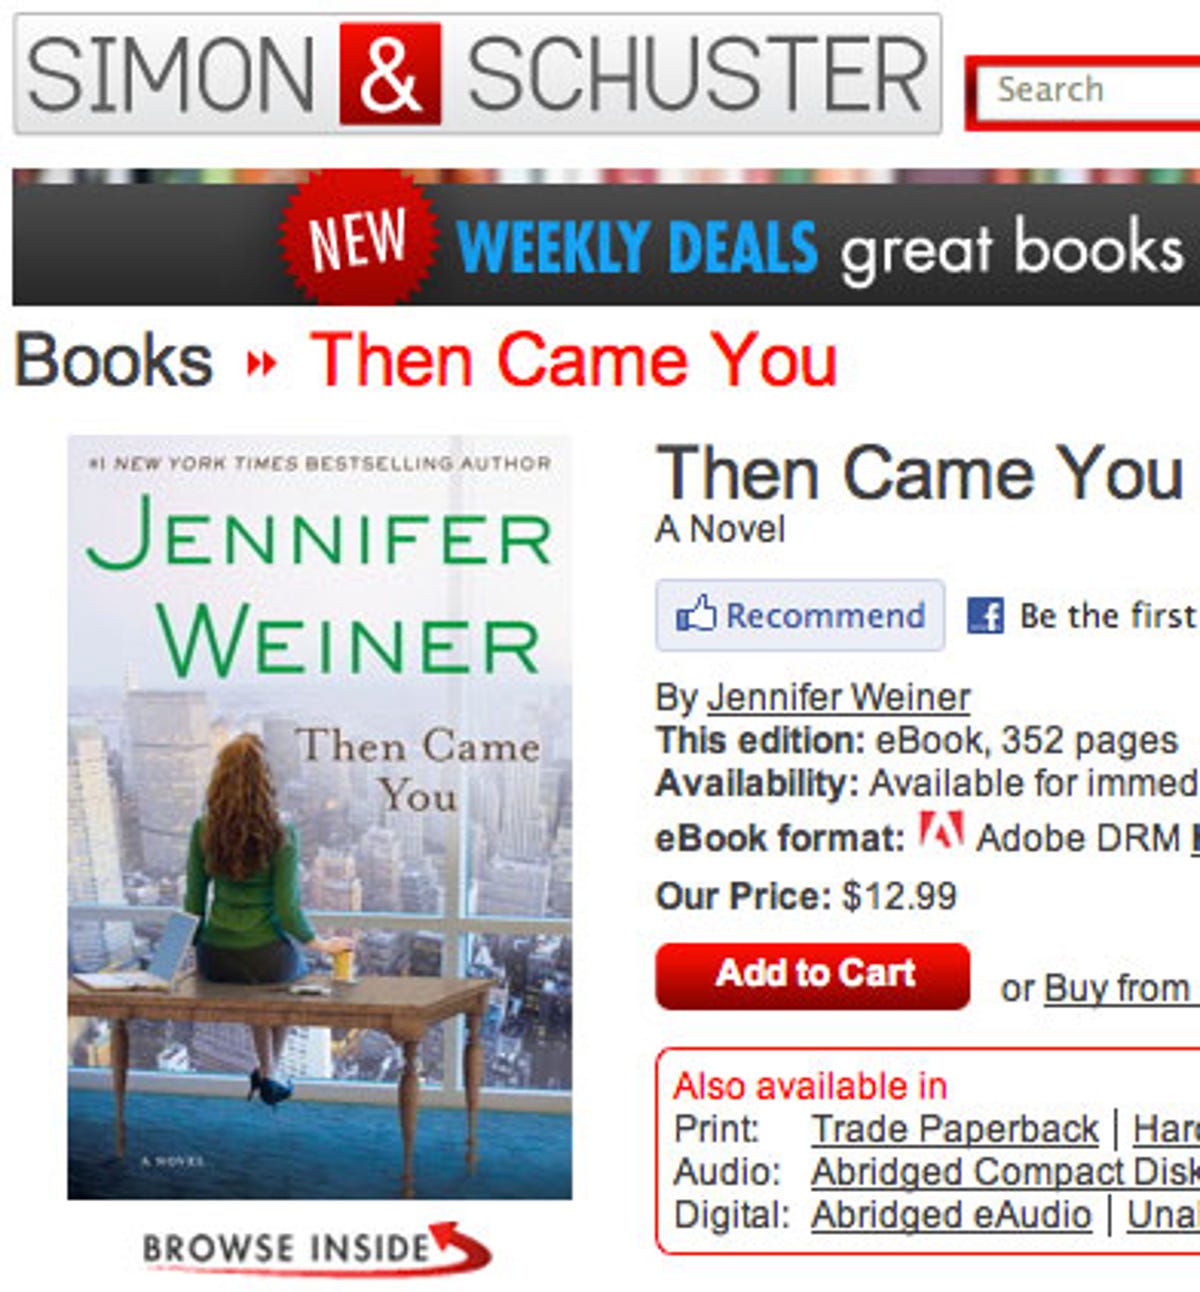 Simon & Schuster offers direct sales of e-books, but getting them to a reader isn't simple.